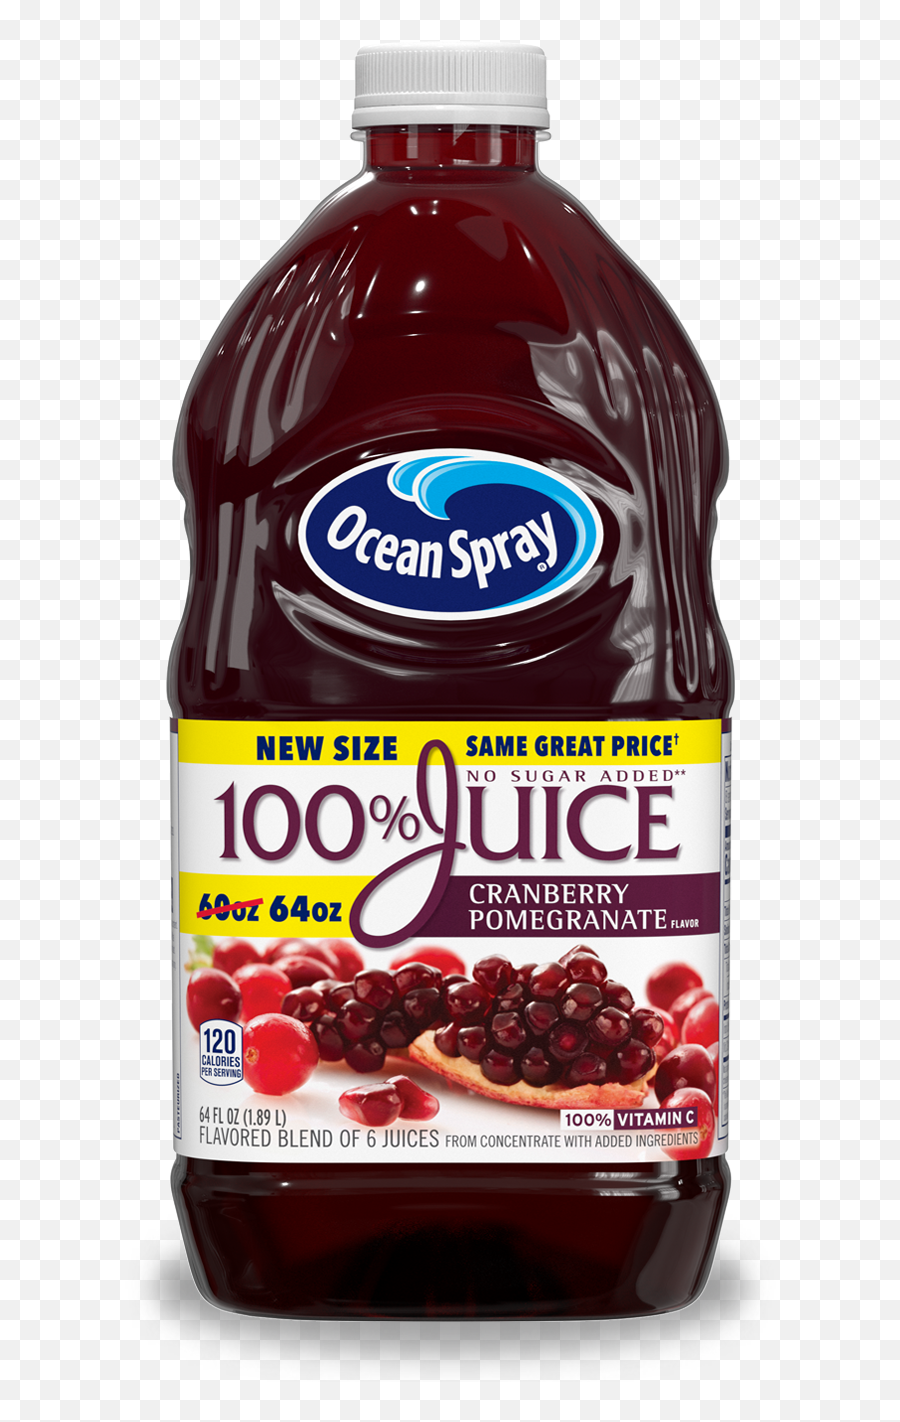 100 Juice Cranberry Pomegranate Ocean Spray Png Icon